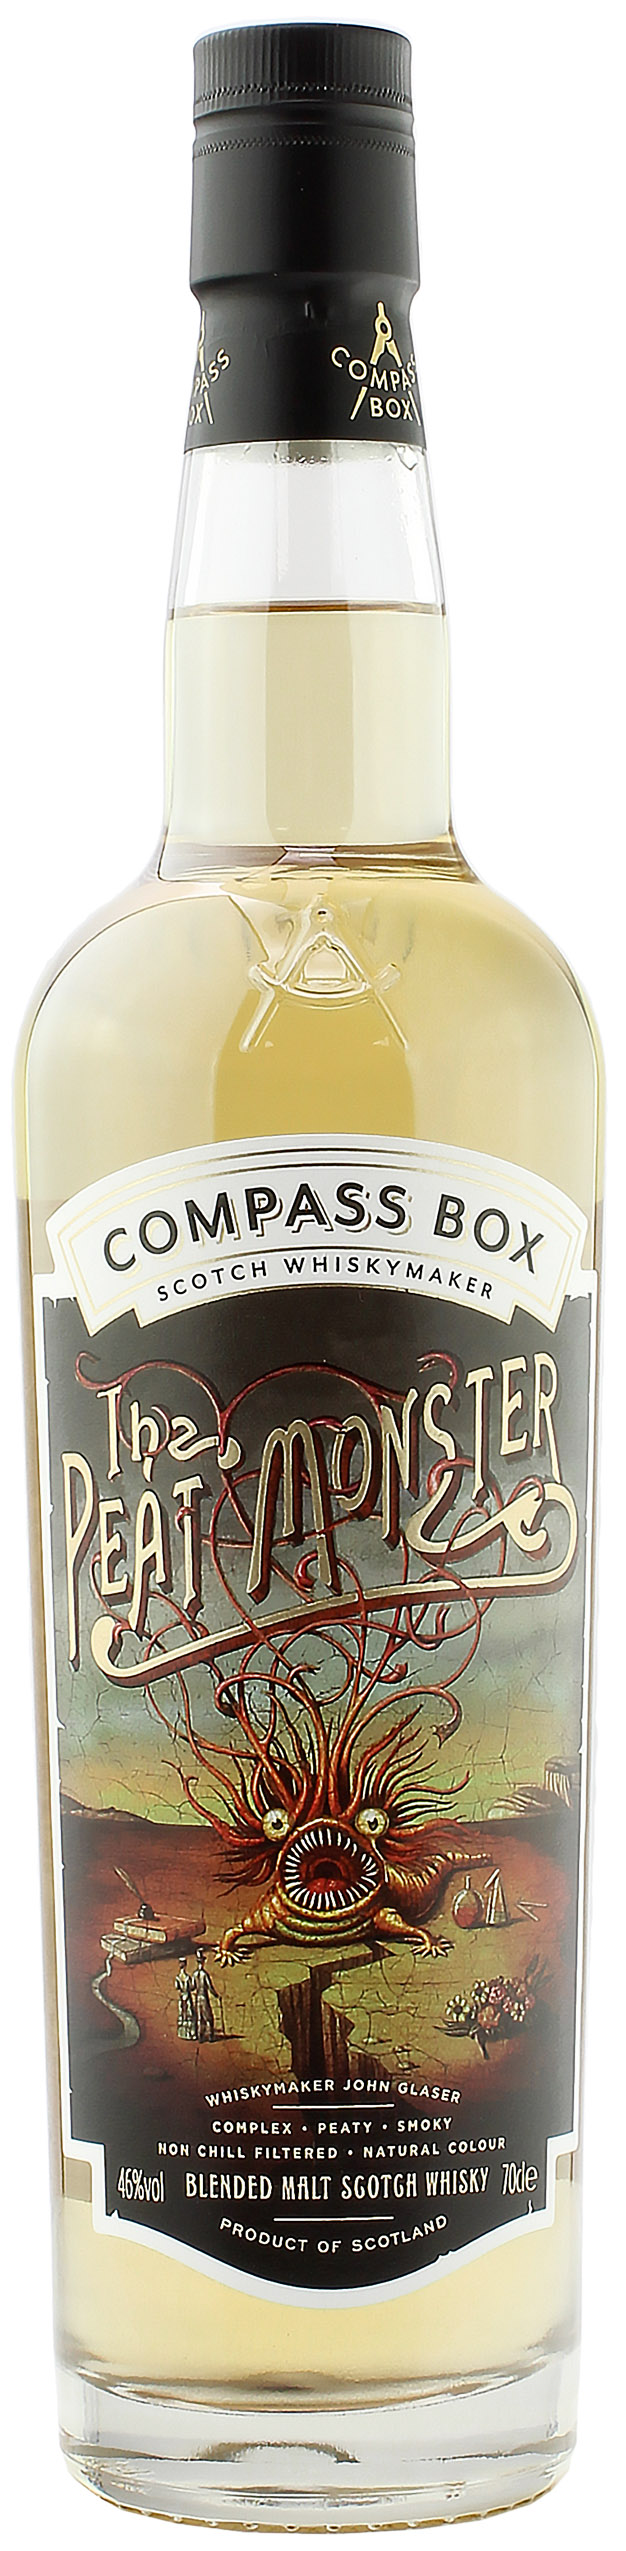 Compass Box The Peat Monster 46.0% 0,7l